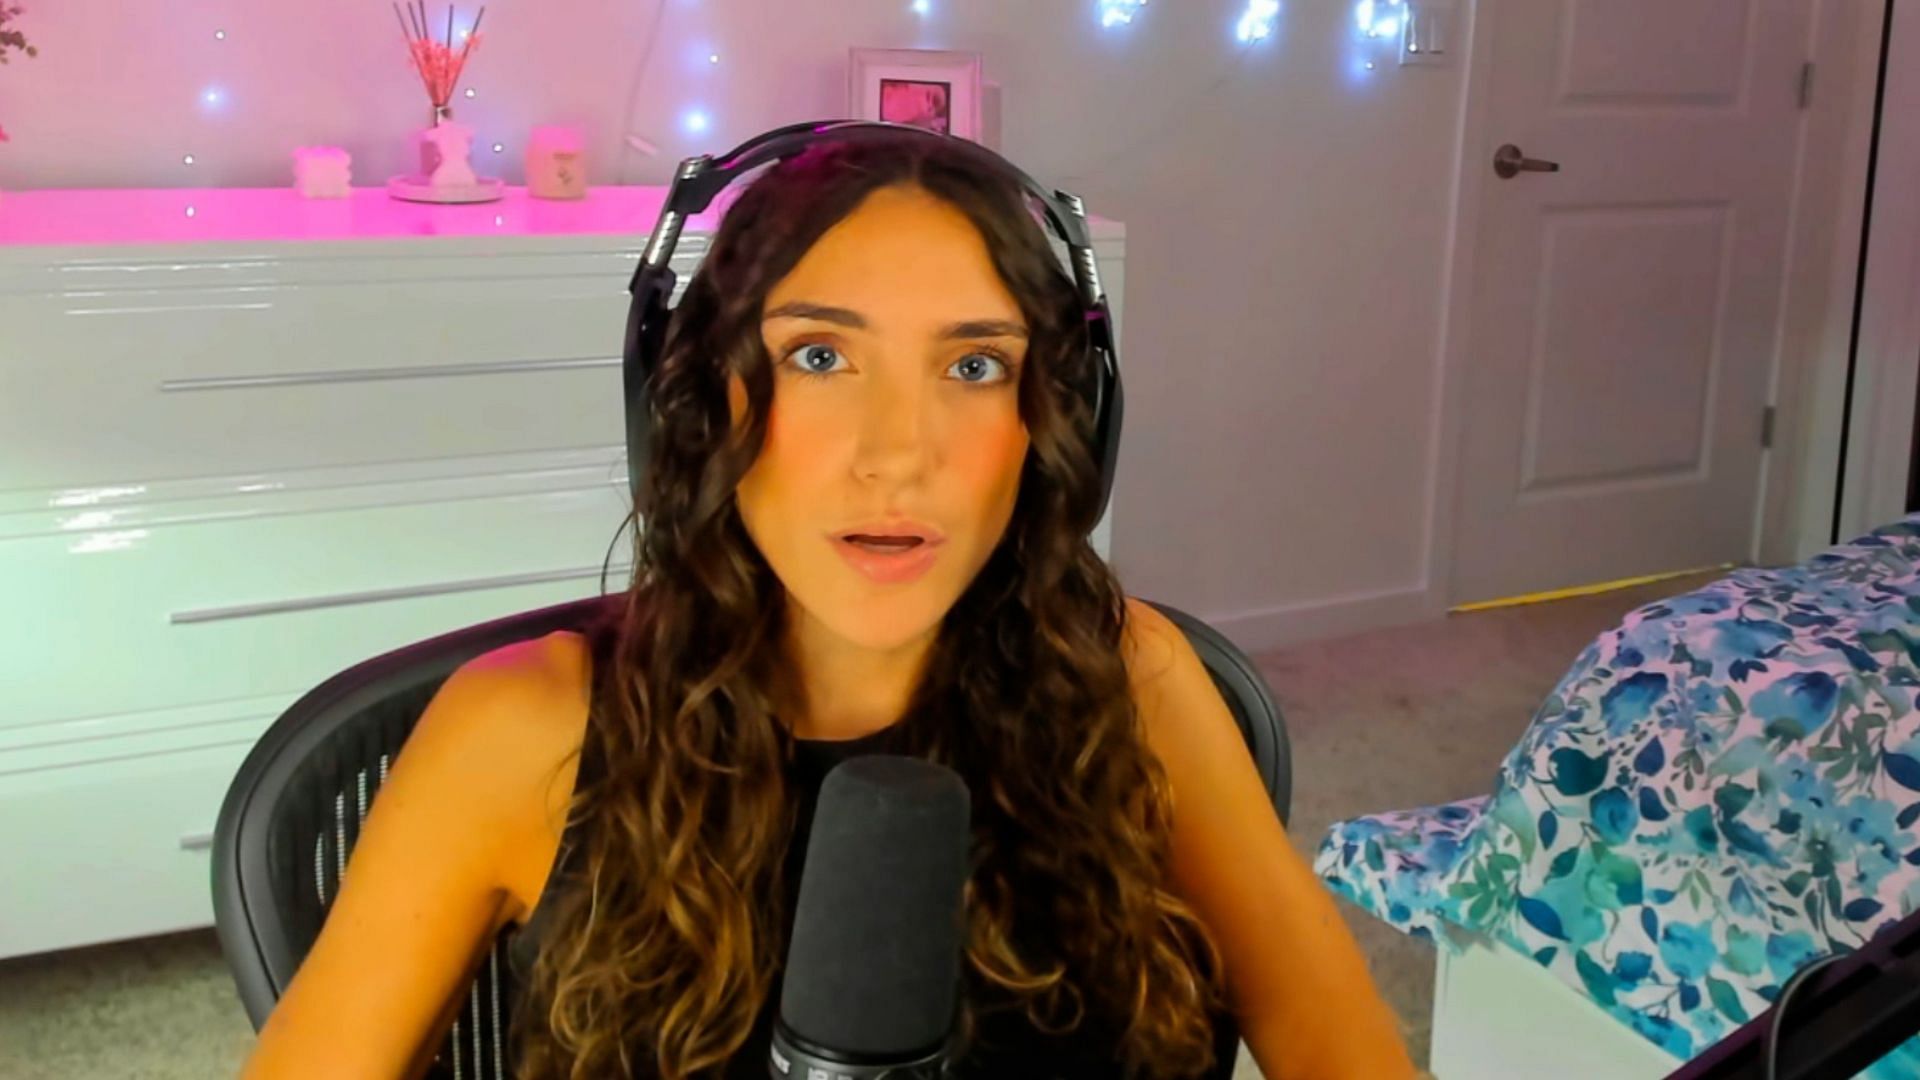 Nadia unbanned on Twitch after being suspended for sharing personal information on stream (Image via Nadia/Twitch)